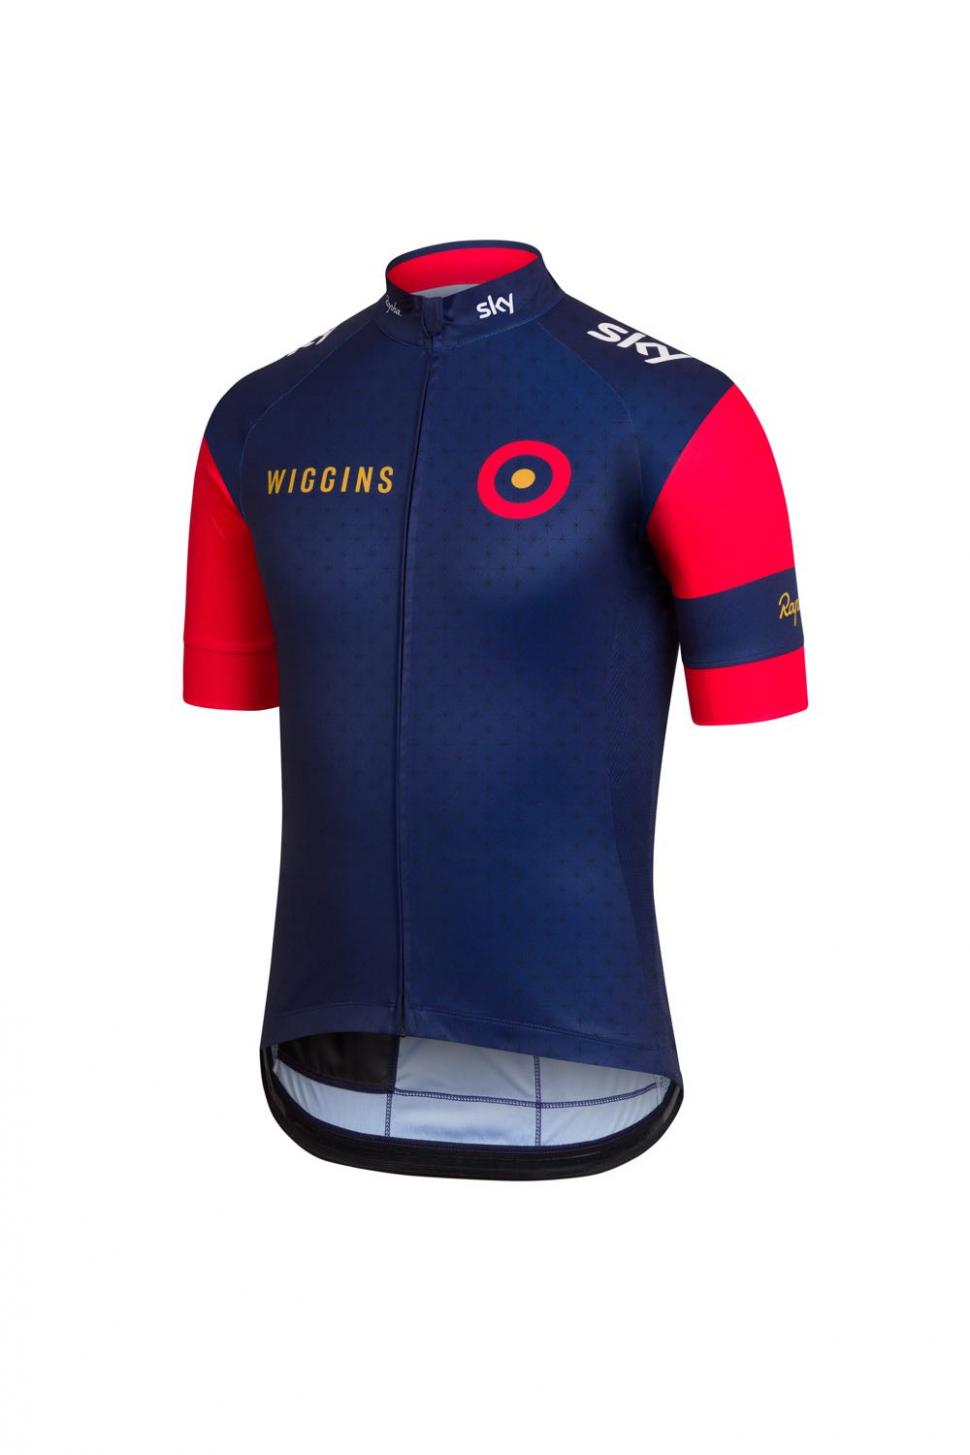 Rapha replica Team Wiggins kit launched 